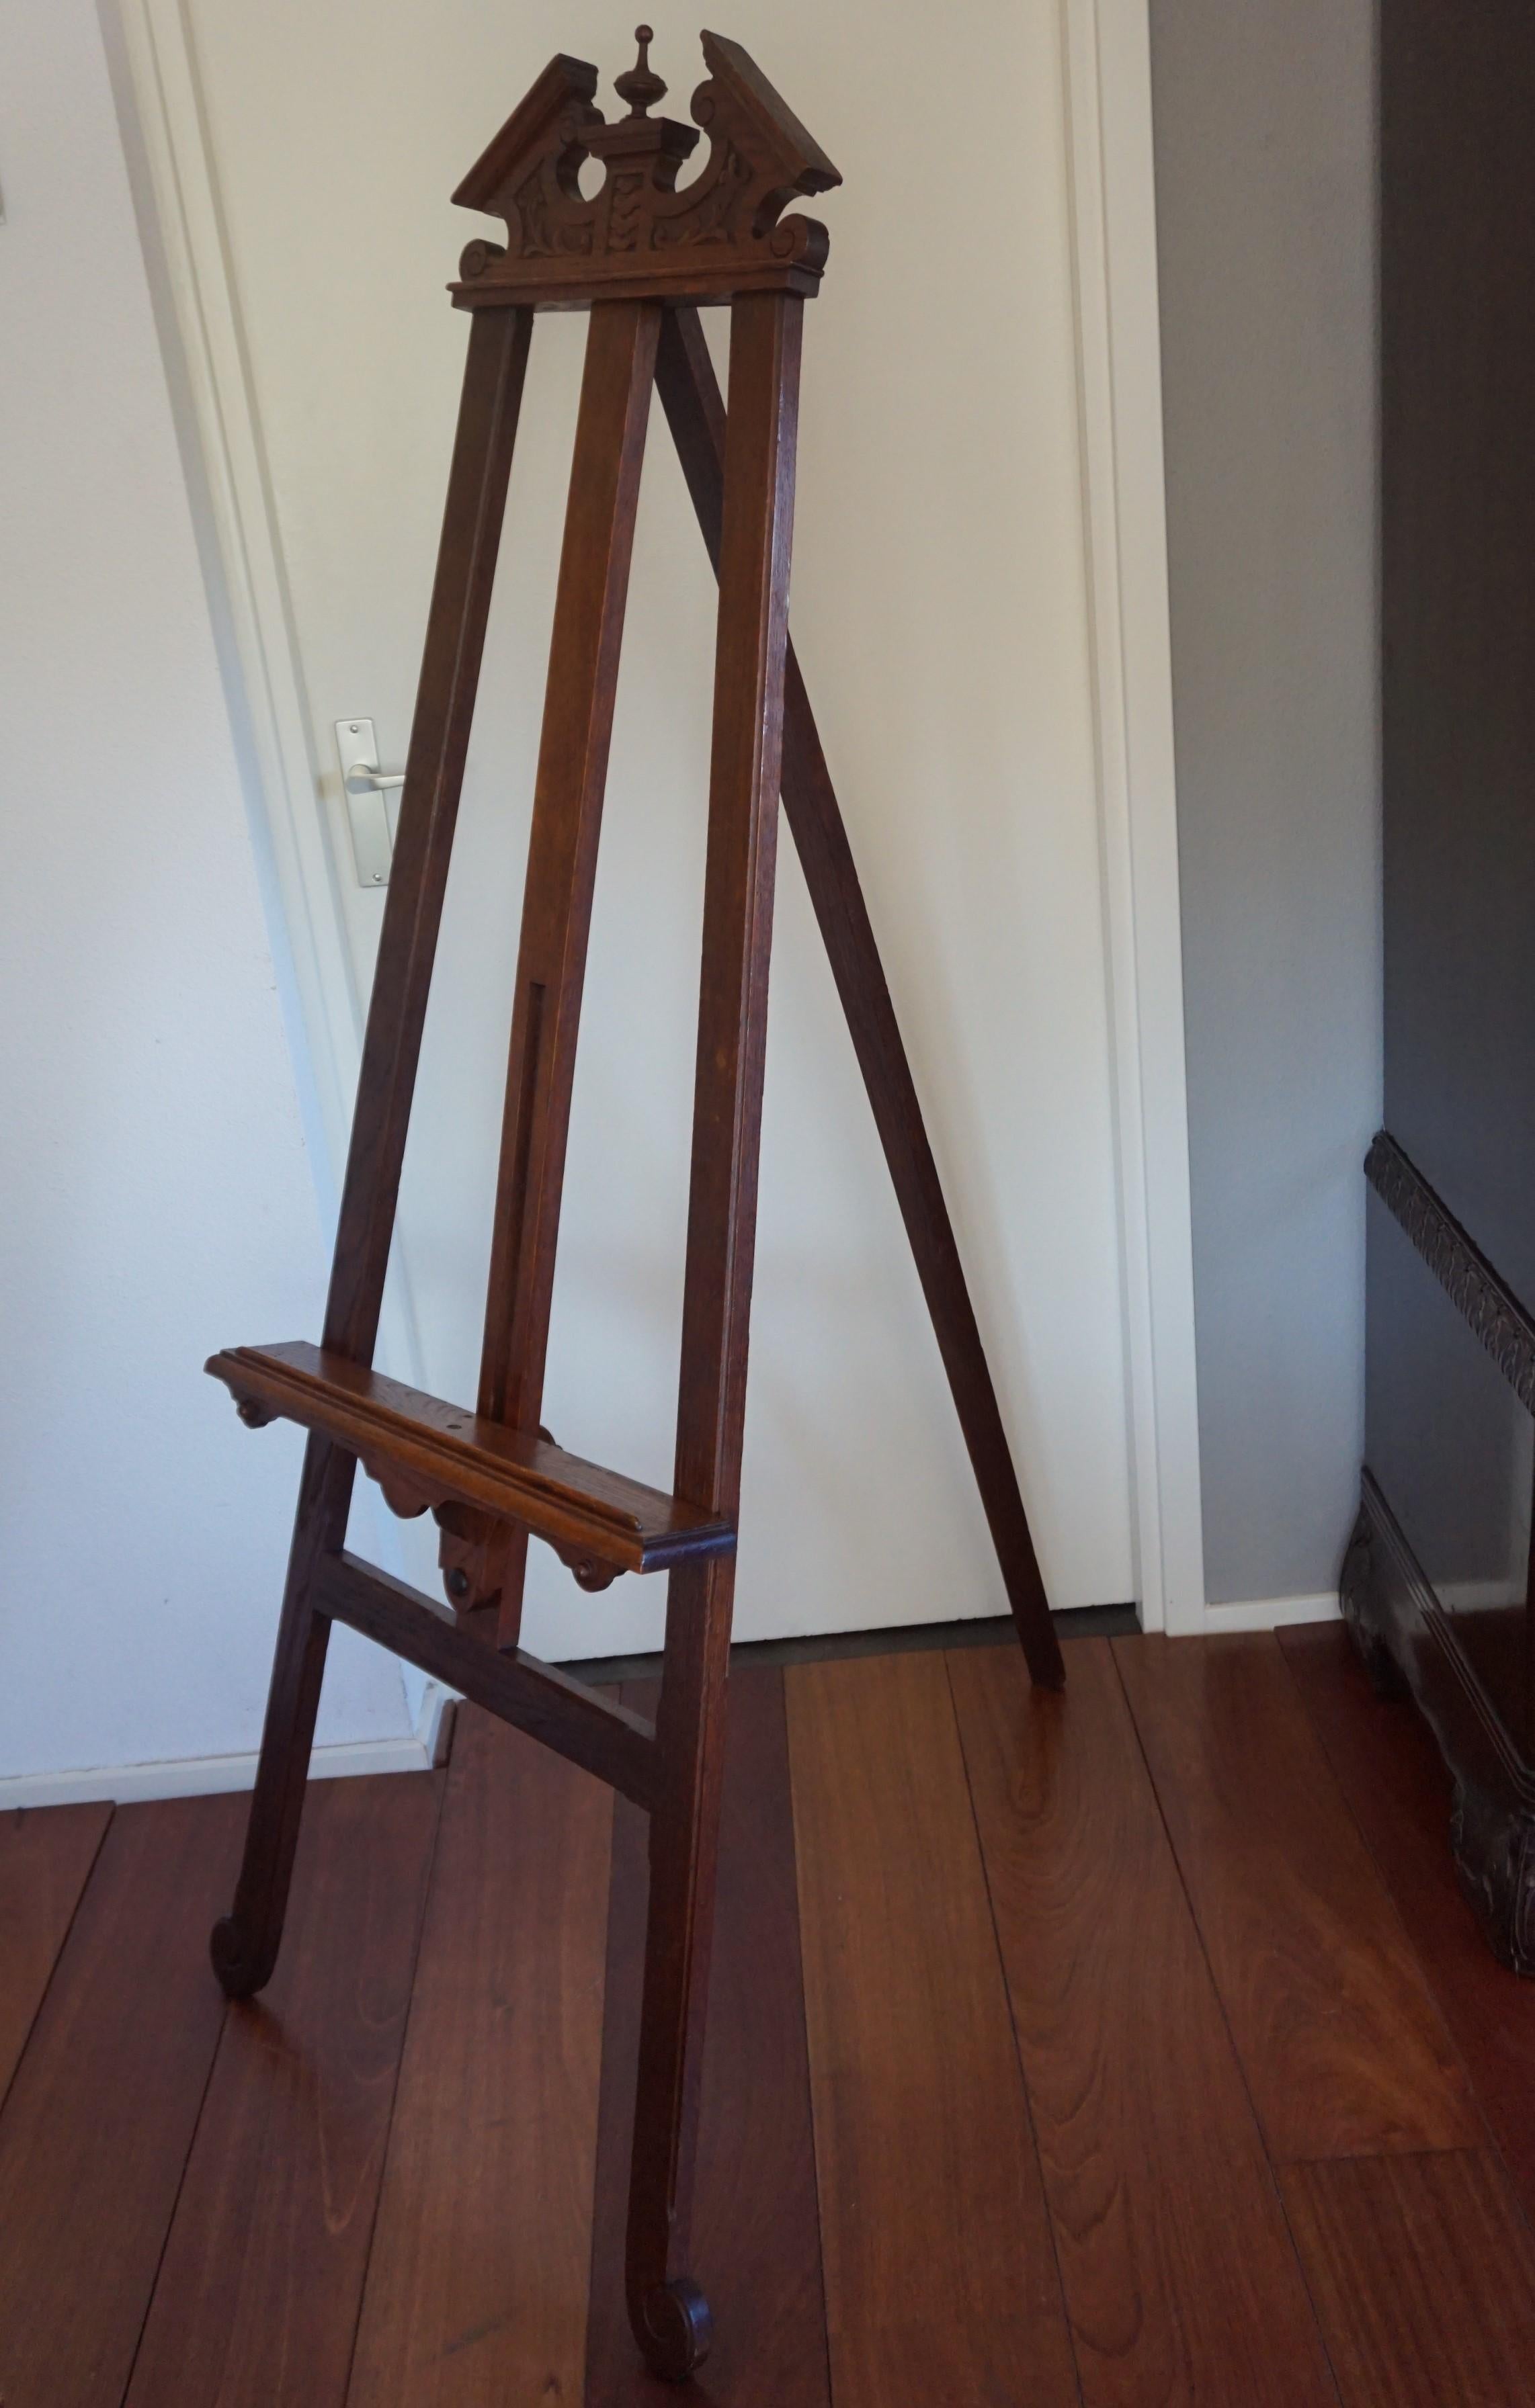 Antique Empire Revival Studio or Gallery Easel / Painting Stand with Provenance 1